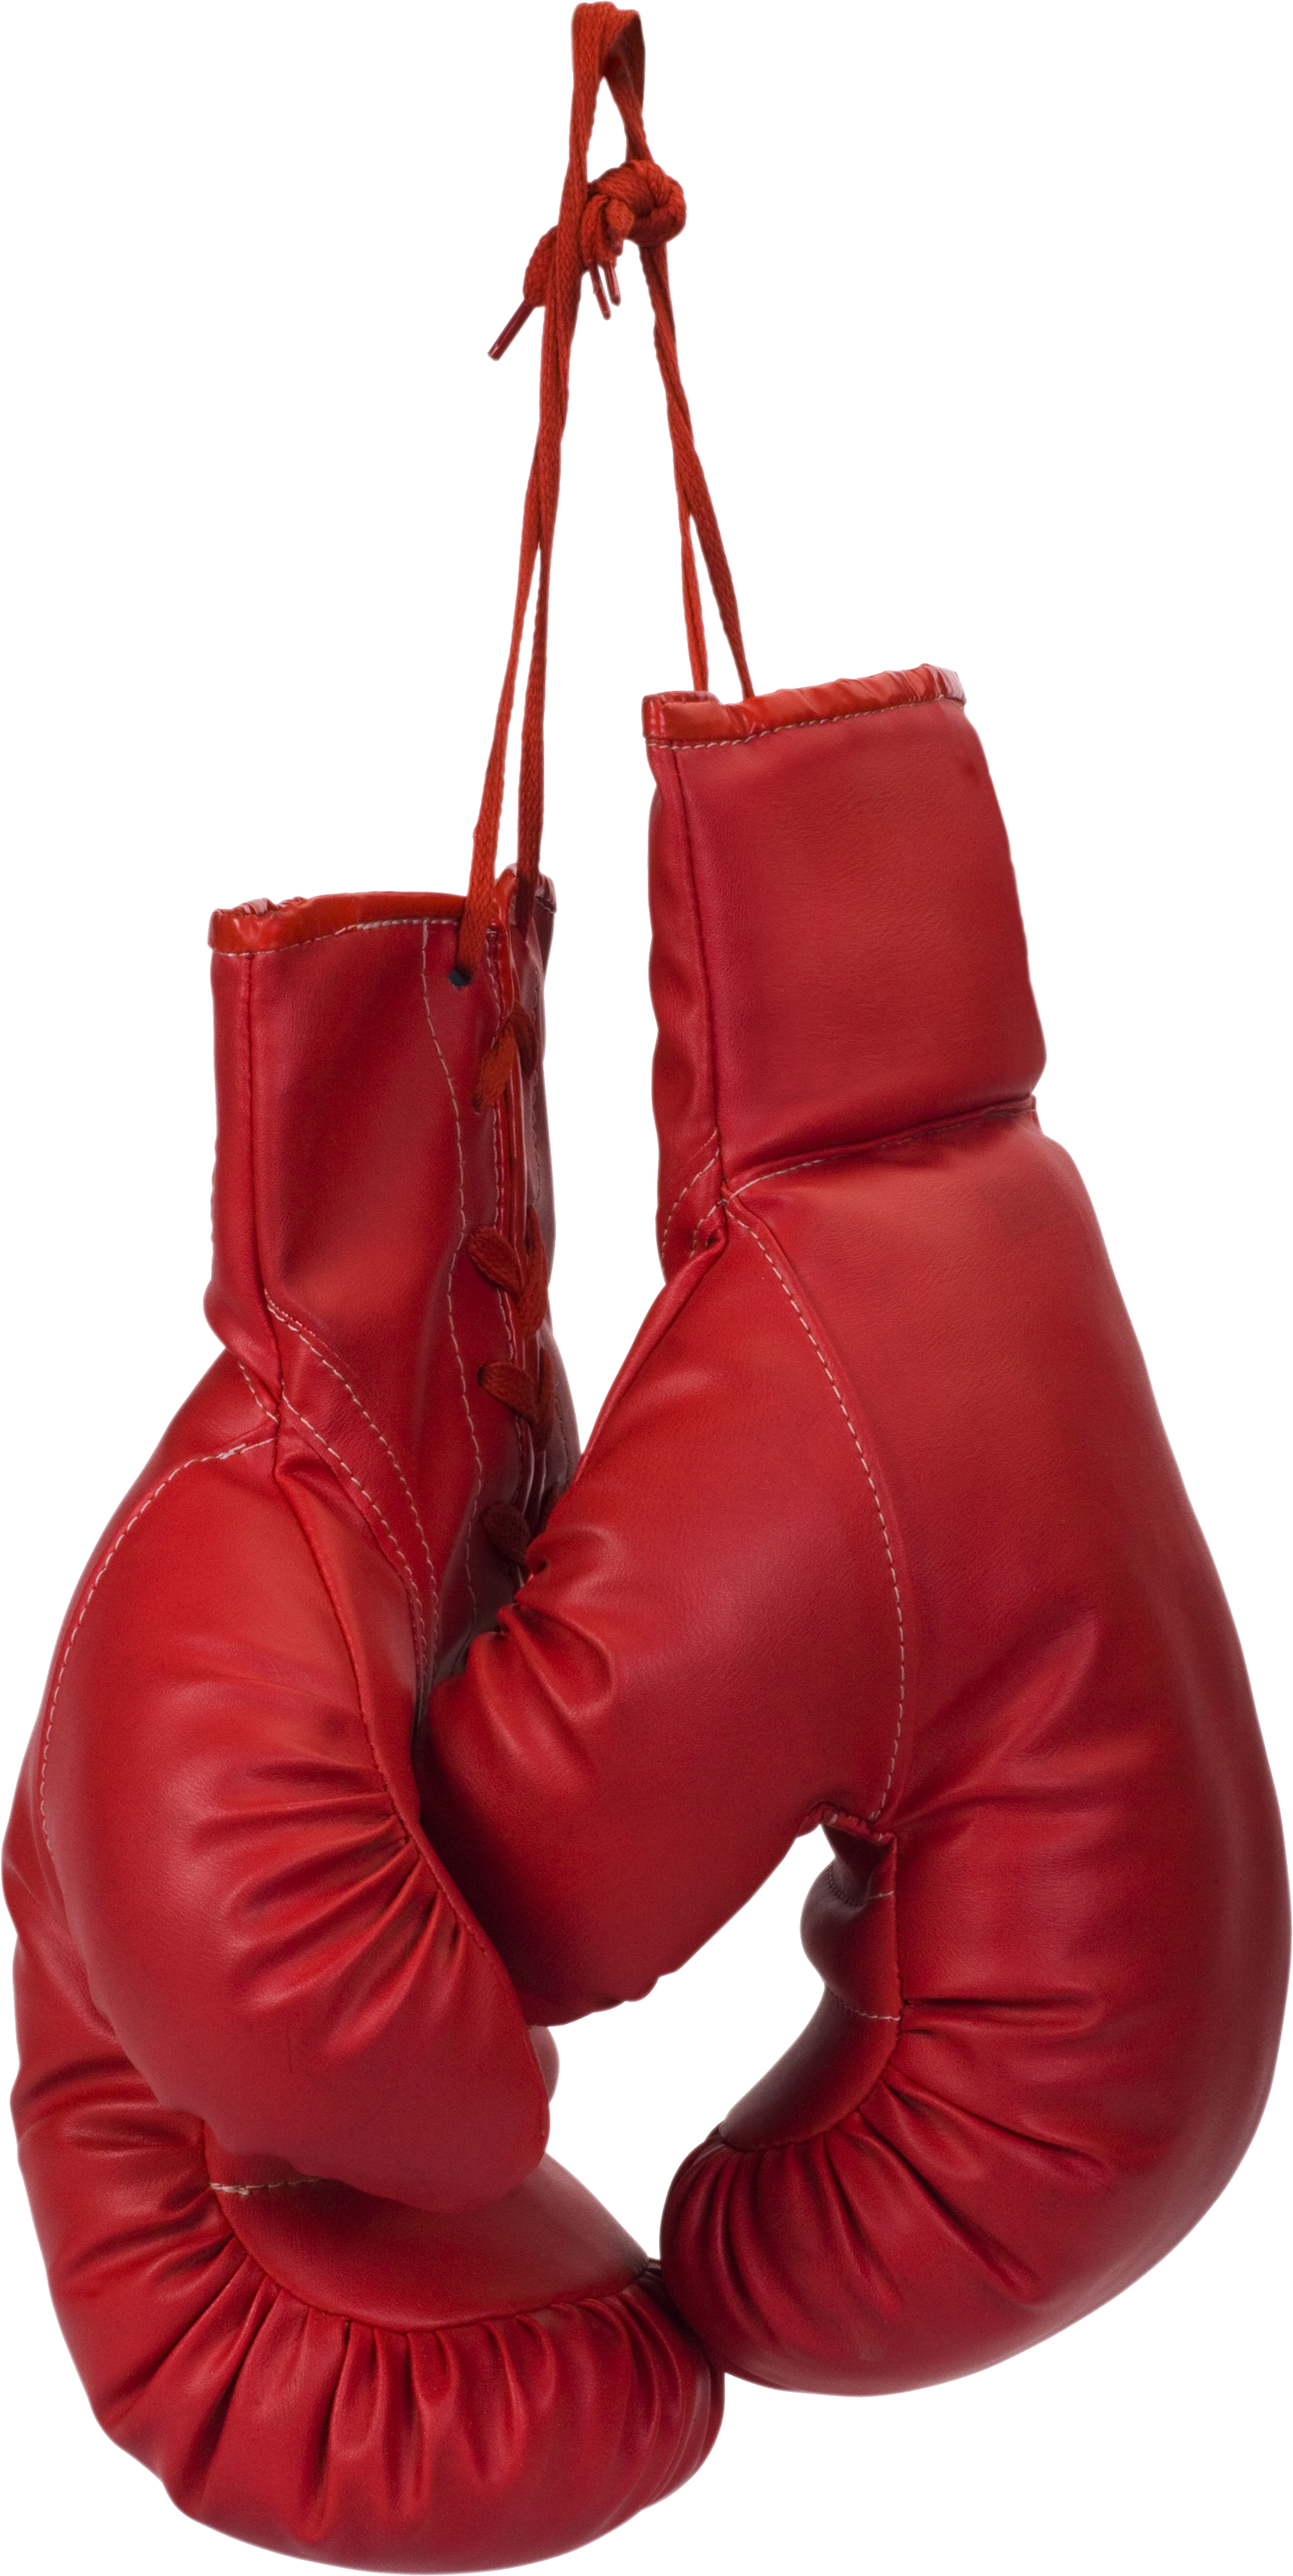 Boxing Transparent PNG Pictures - Free Icons and PNG Backgrounds